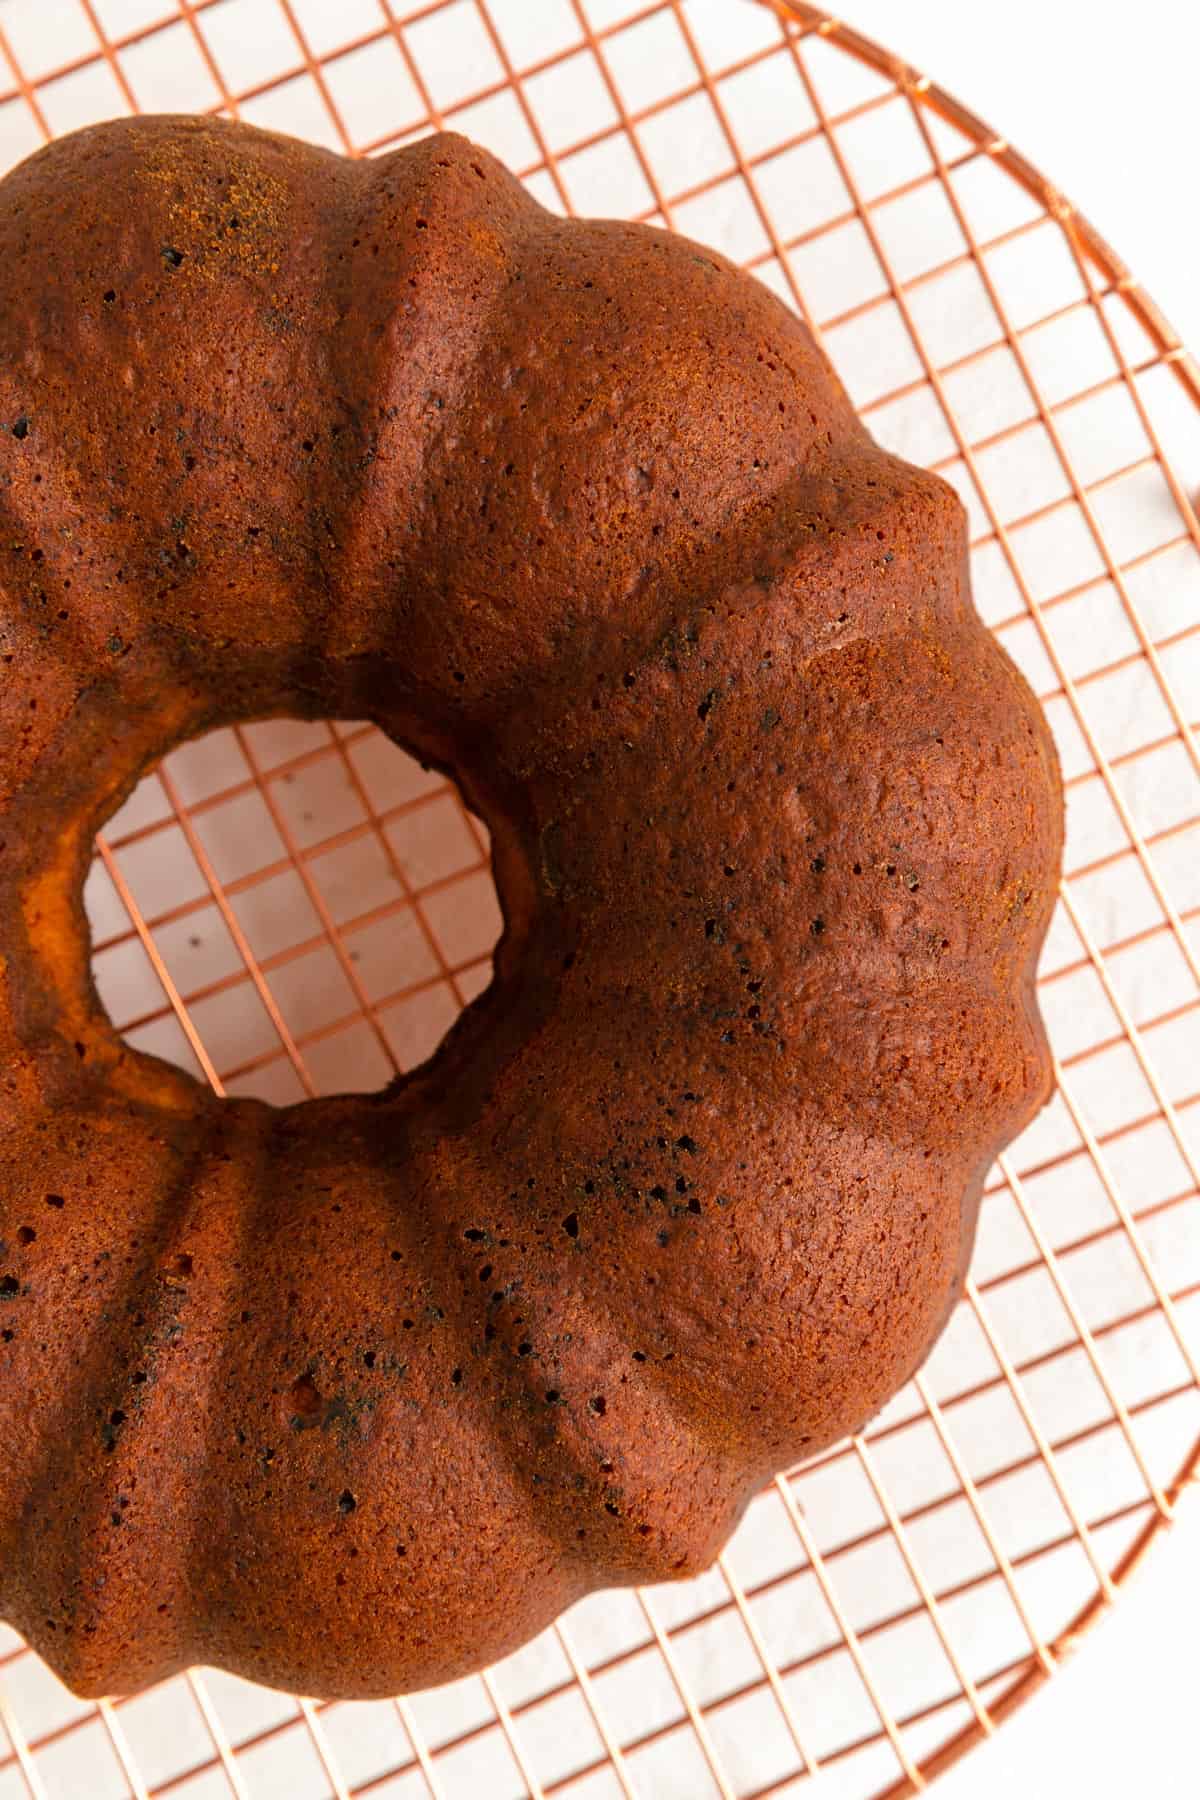 Baked raspberry white chocolate Bundt and copper wire rack shot from above.